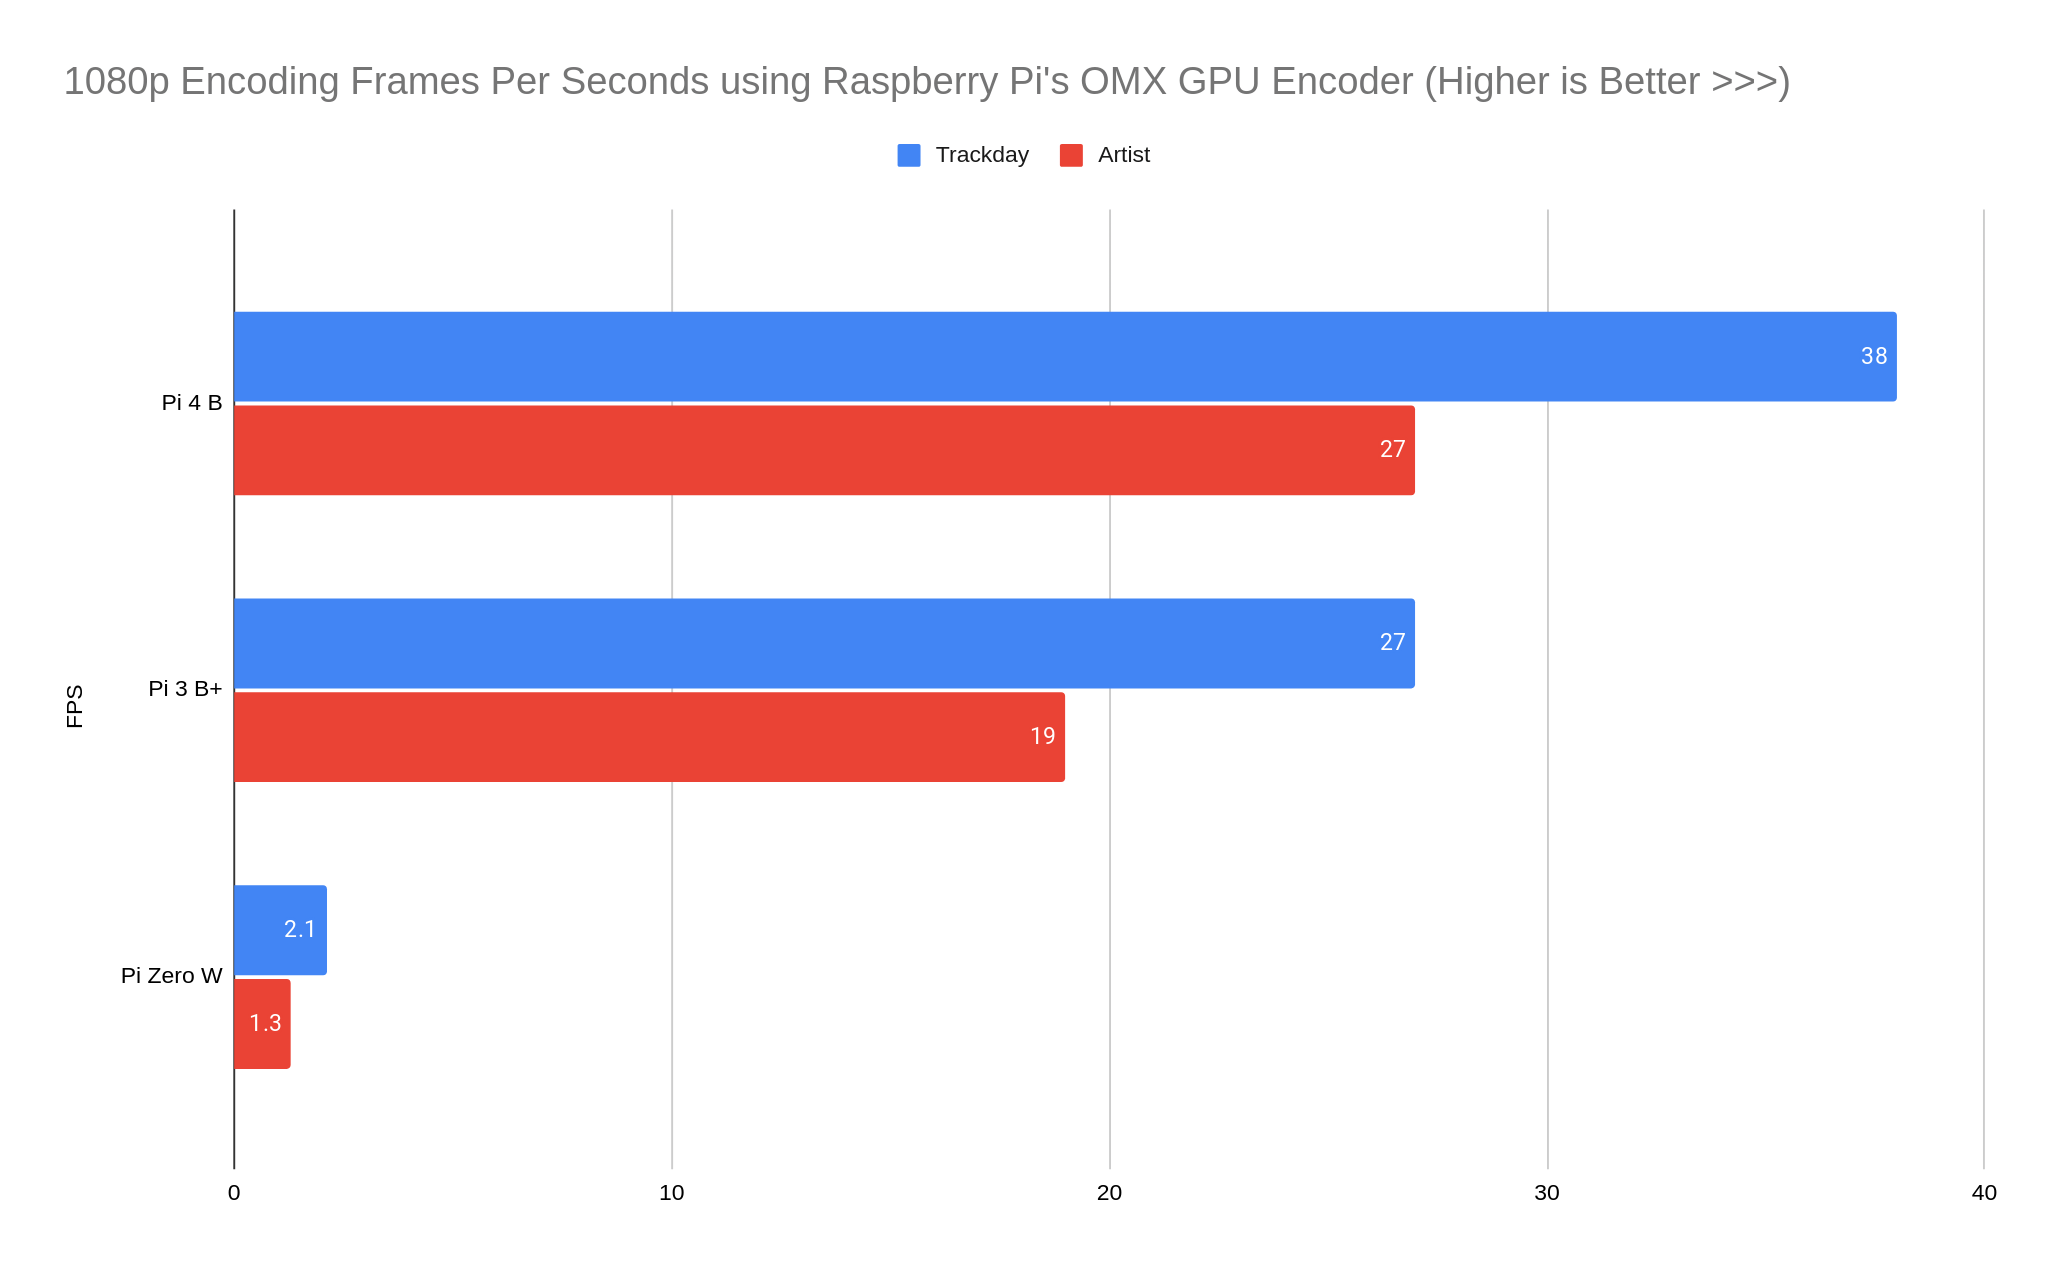 RPi 5 vs RPi 4: A Comparison of Raspberry Pi Benchmarks and More